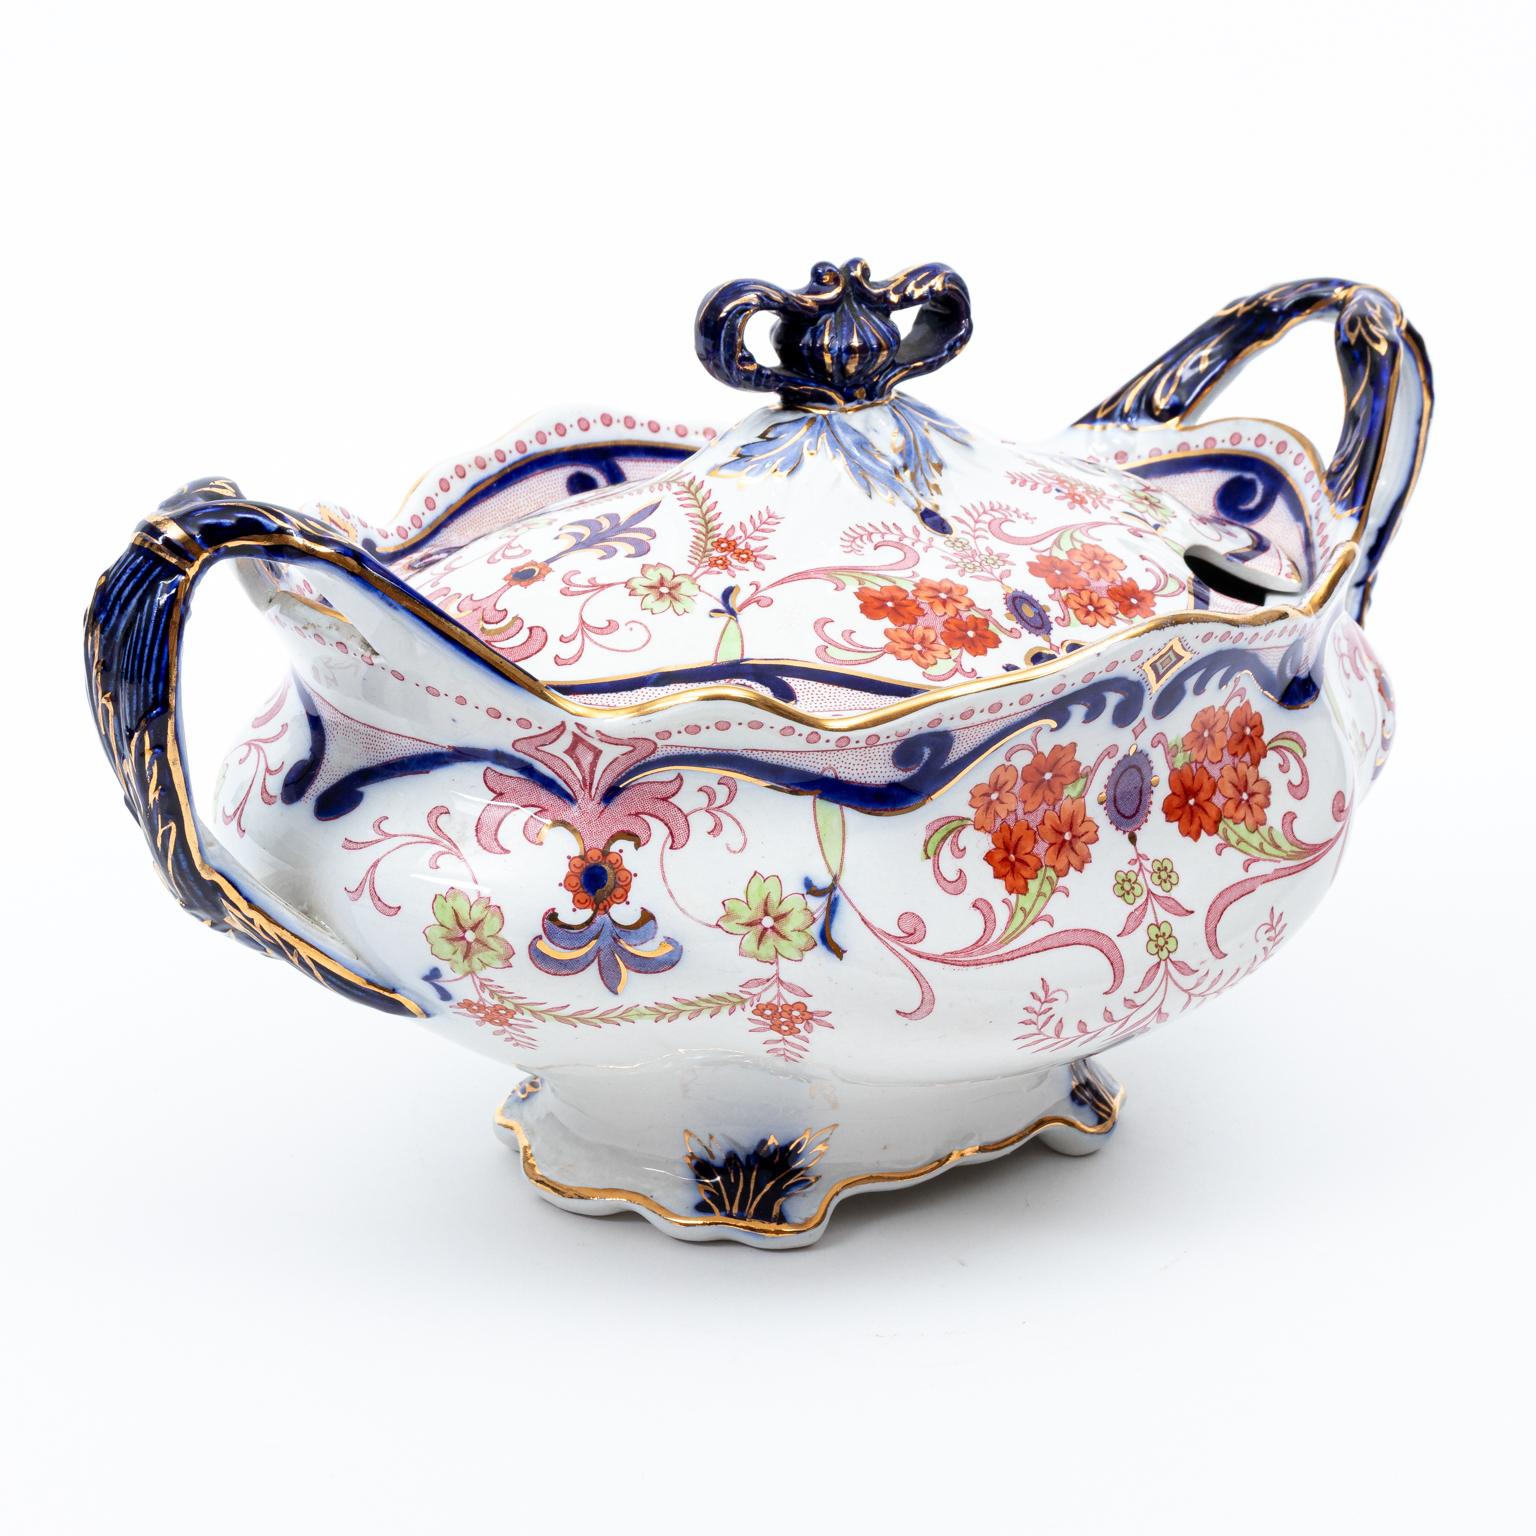 Sydenham Polychrome Lidded Tureen In Good Condition For Sale In Stamford, CT